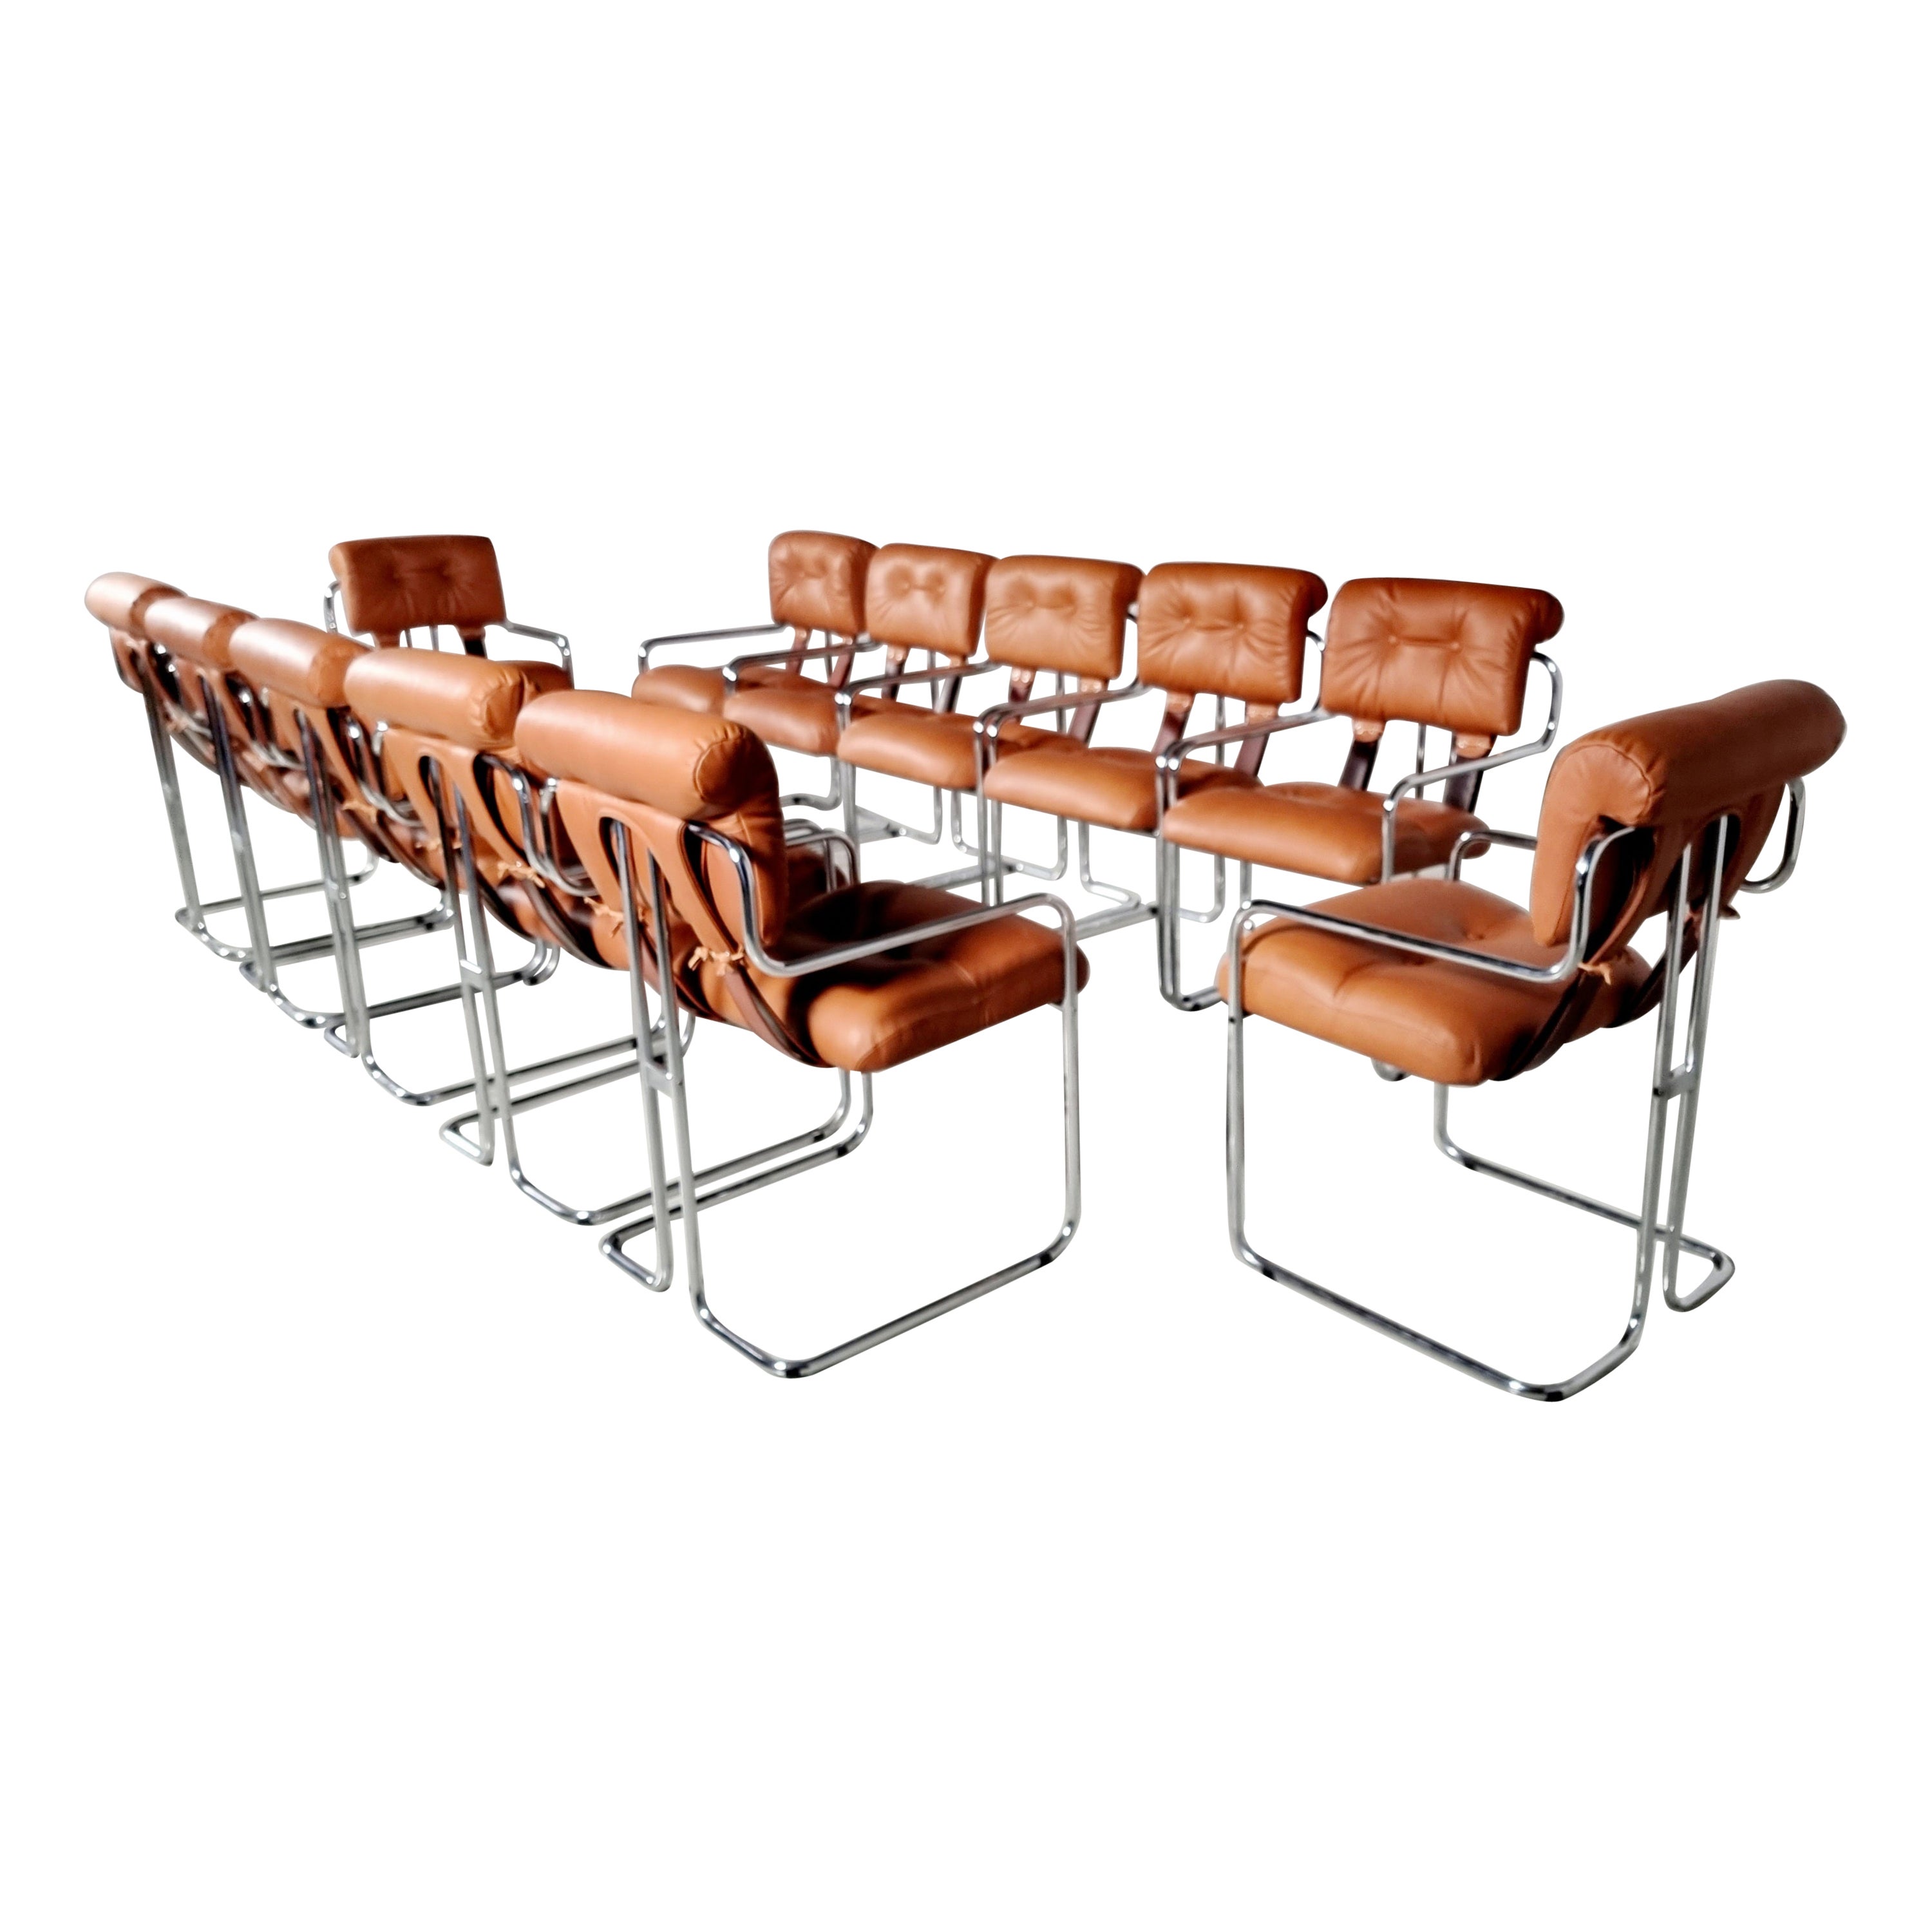 Set of 12 Tucroma Chairs in cognac leather by Guido Faleschini, Mariani